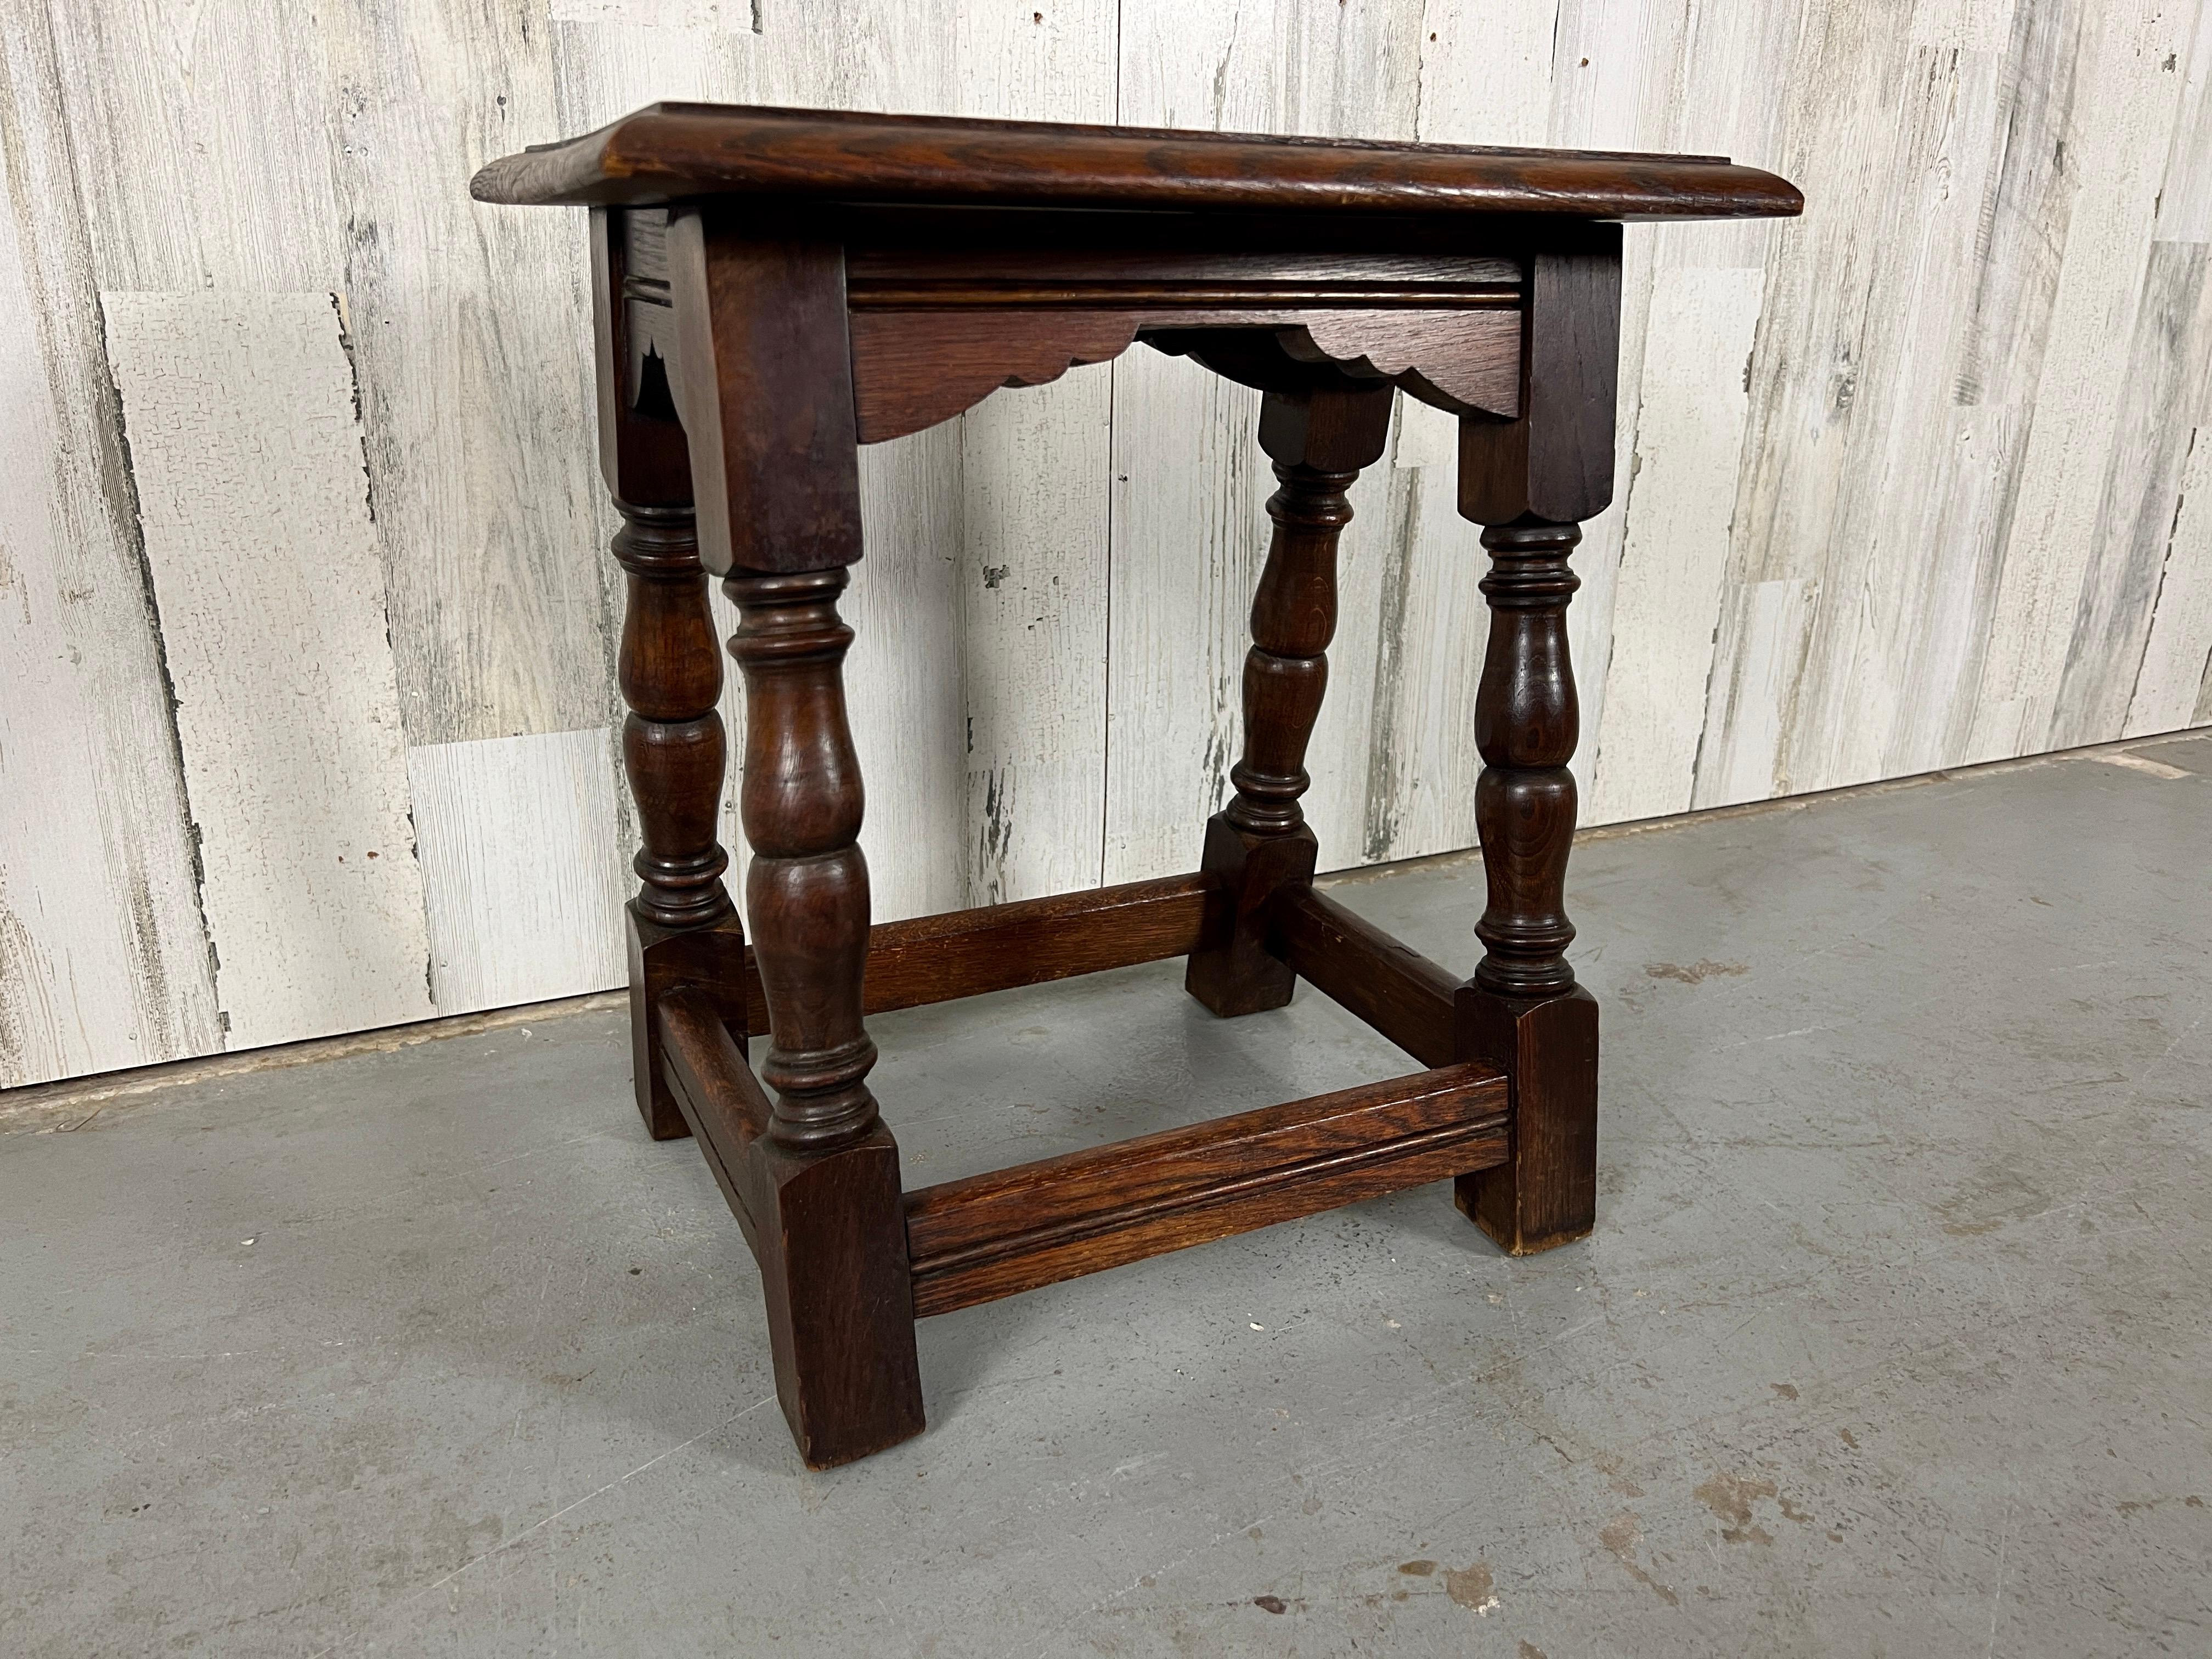 20th Century Antique Rustic Stool / Table For Sale